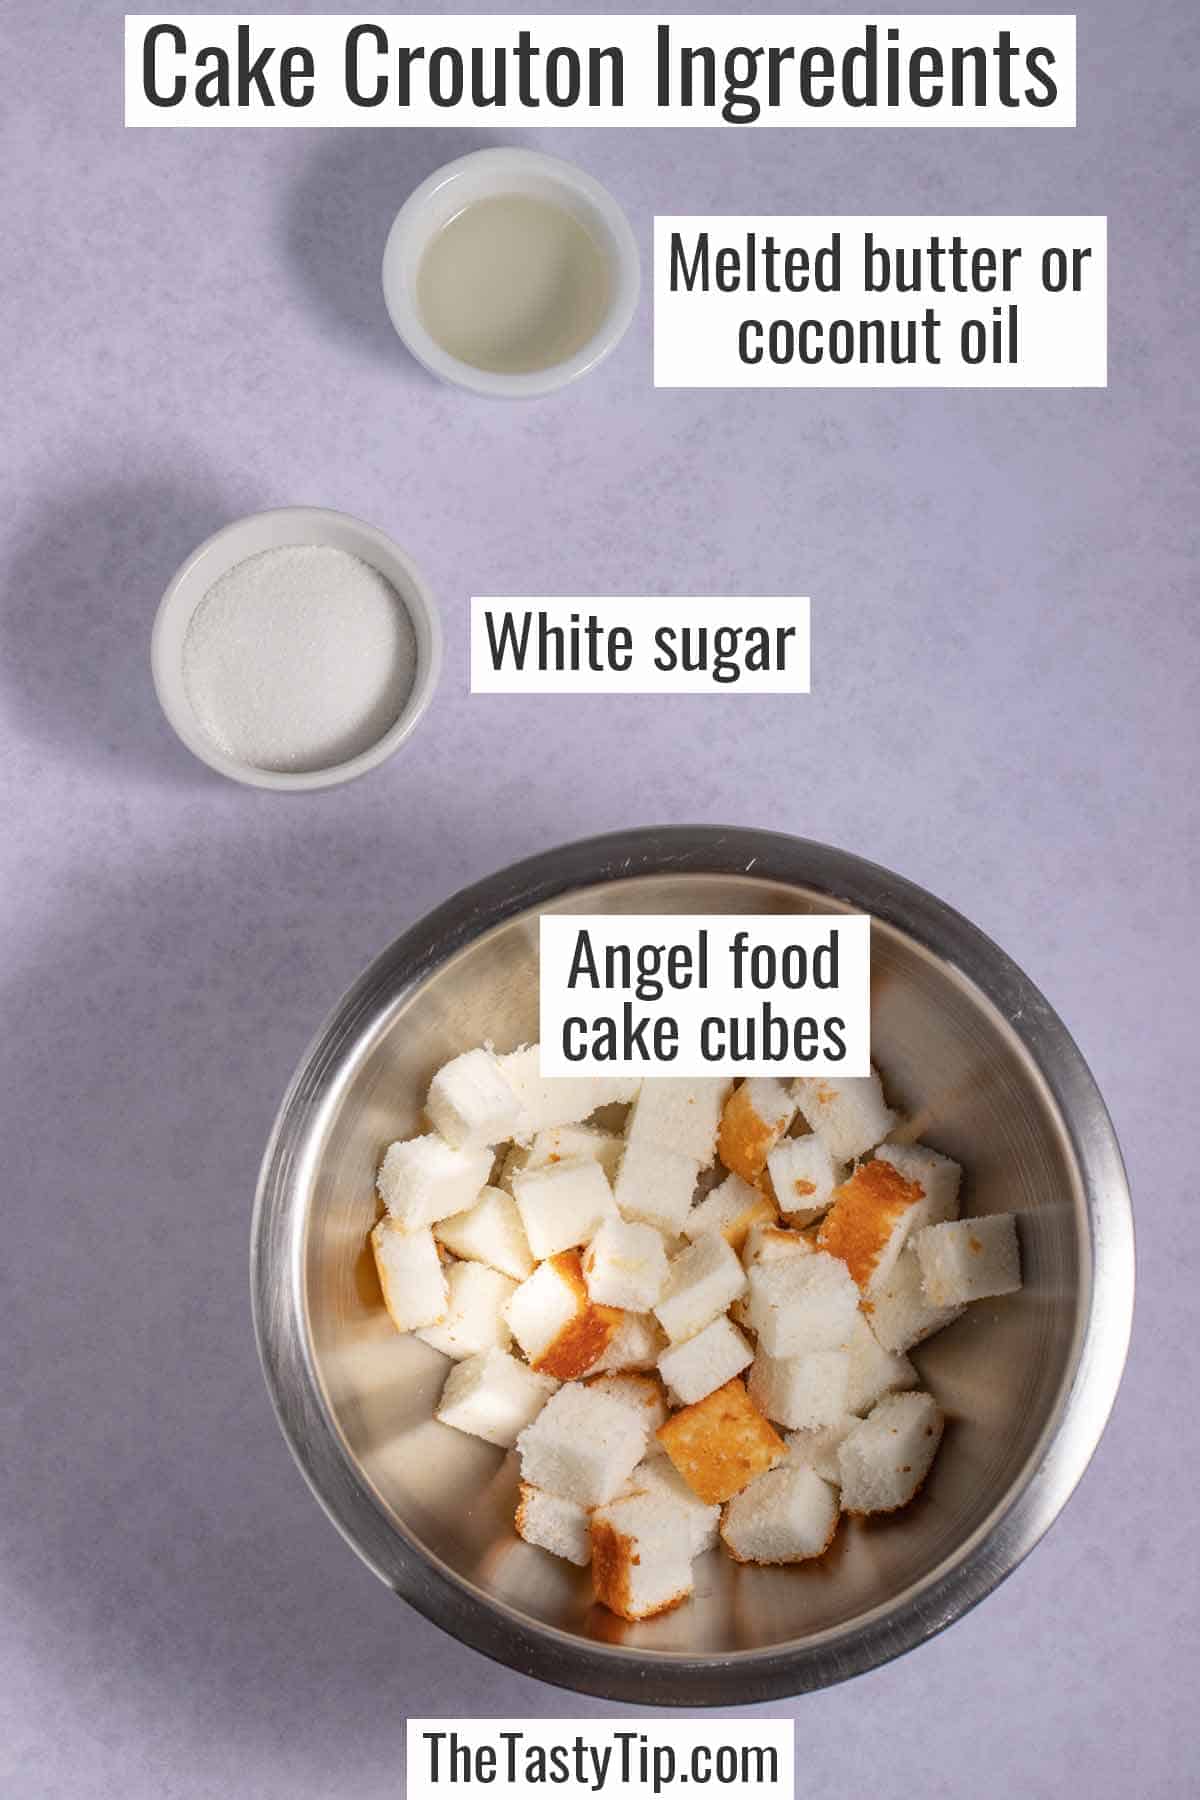 Bowl of melted coconut oil, bowl of white sugar, and bowl of angel food cake cubes. These are the ingredients for angel food cake croutons.